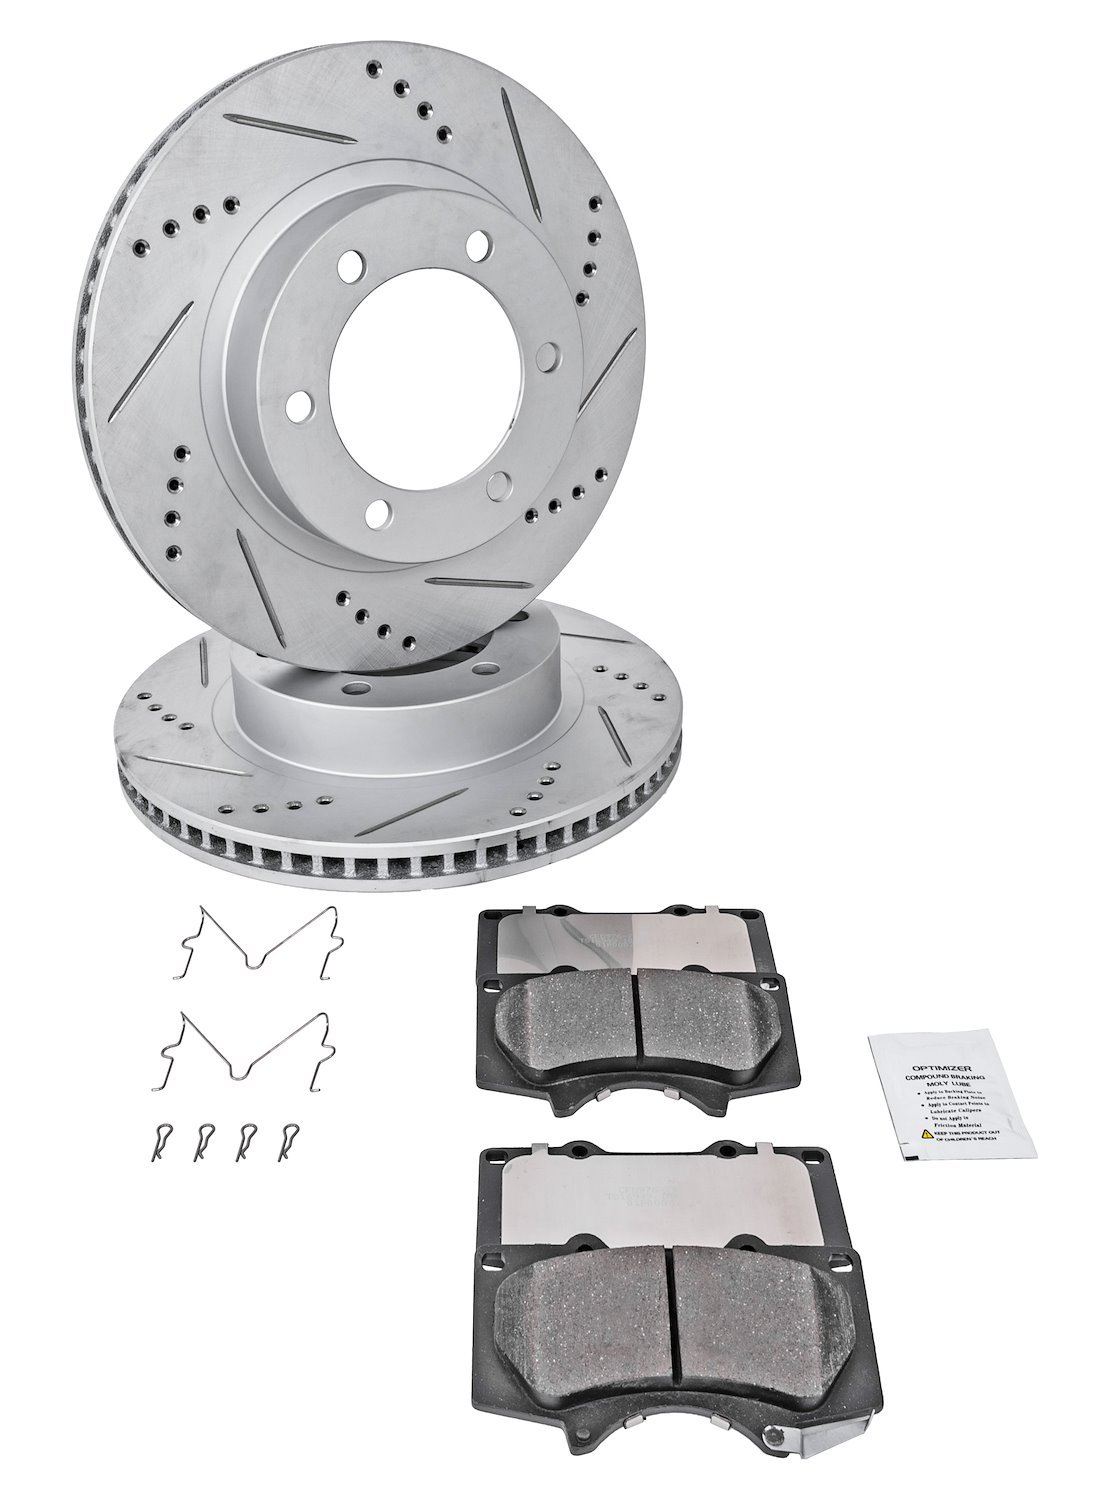 Truck-N-Tow JX25 Brake Pads & Rotor Kit Fits Select 2003-2022 Toyota 4Runner, FJ Cruiser, Tacoma [Front]